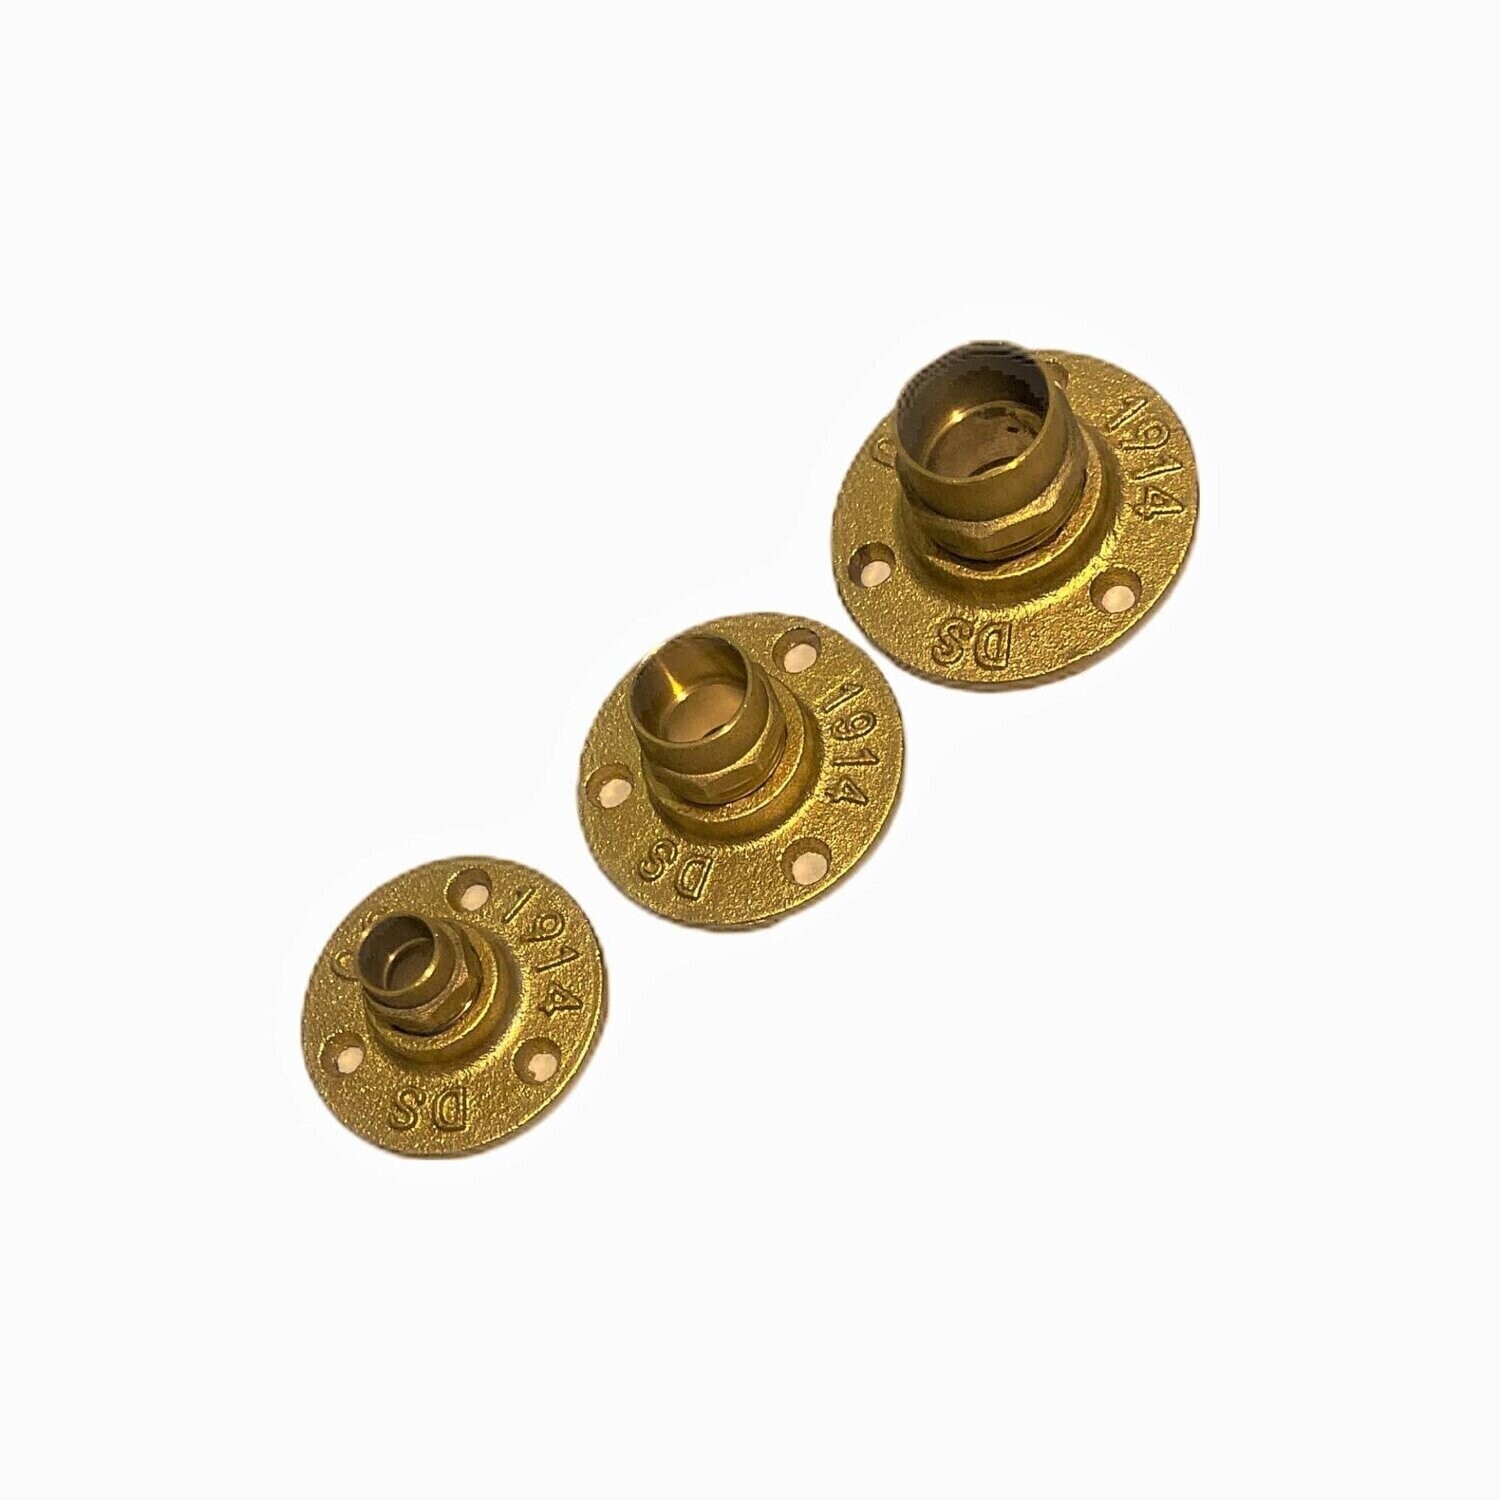 Brass flanges adapted for copper pipe (End feed)